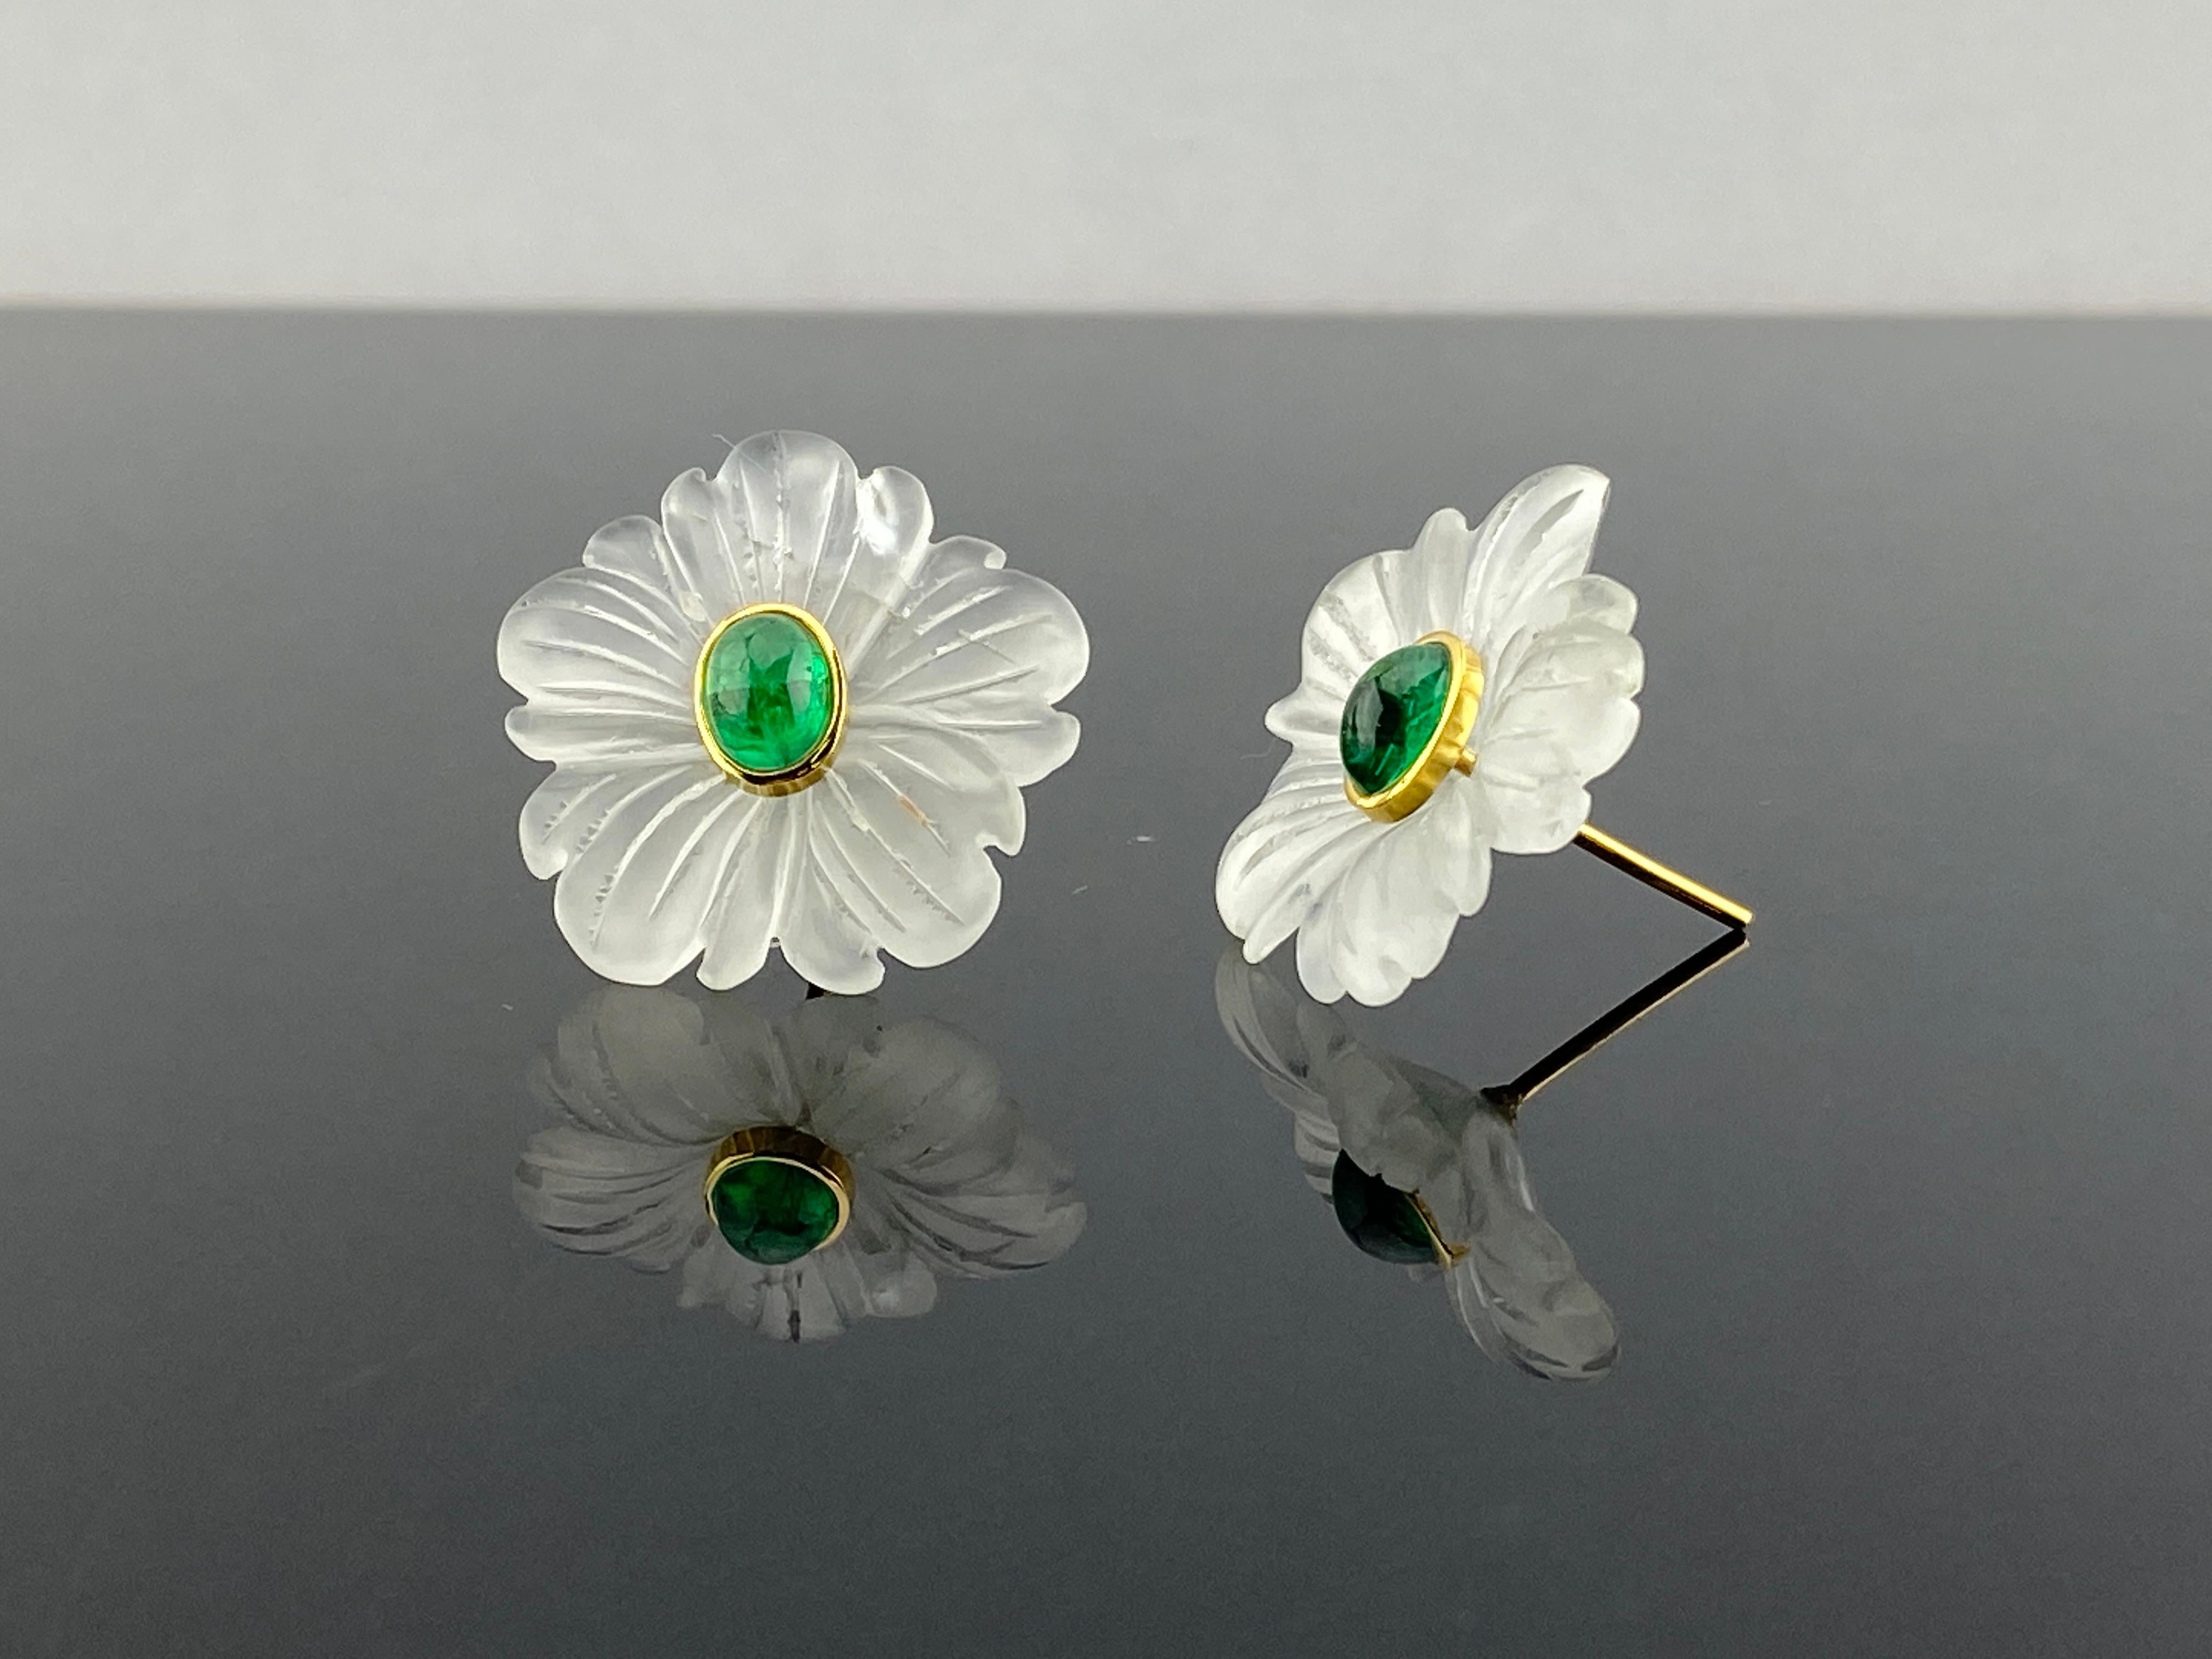 This earring is made from rock crystal as the petals of the flower and has emeralds set into the center with 18K gold. This pair of earrings adds another floral element of to your summer outfits as its great for daytime wear with just casual